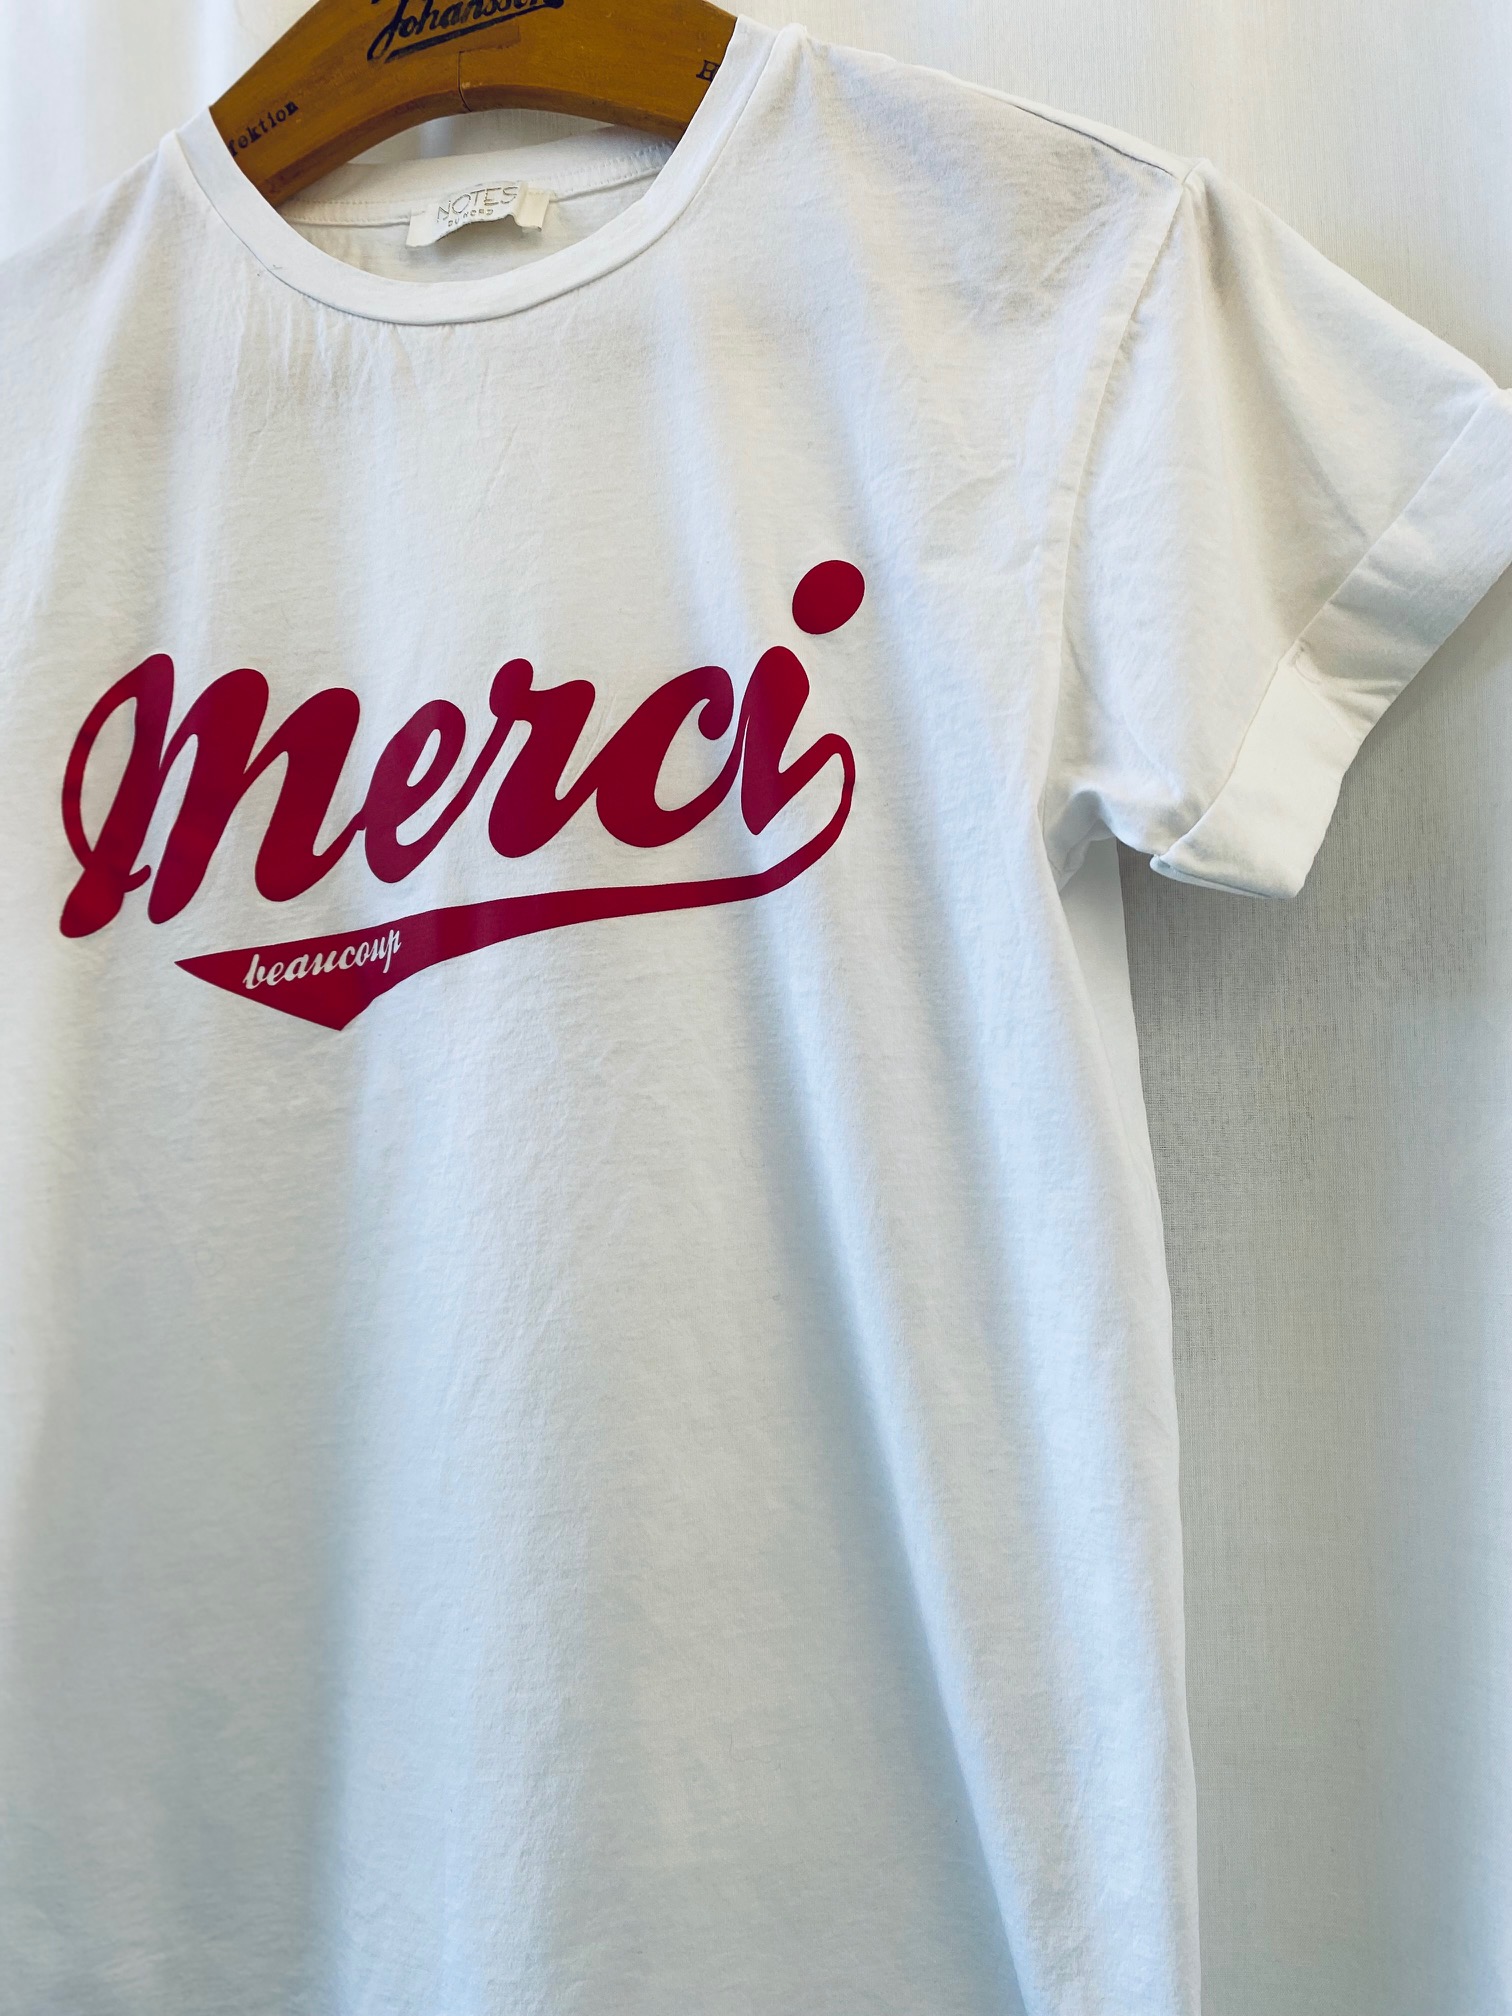 T-shirt "Merci" Notes the Nord